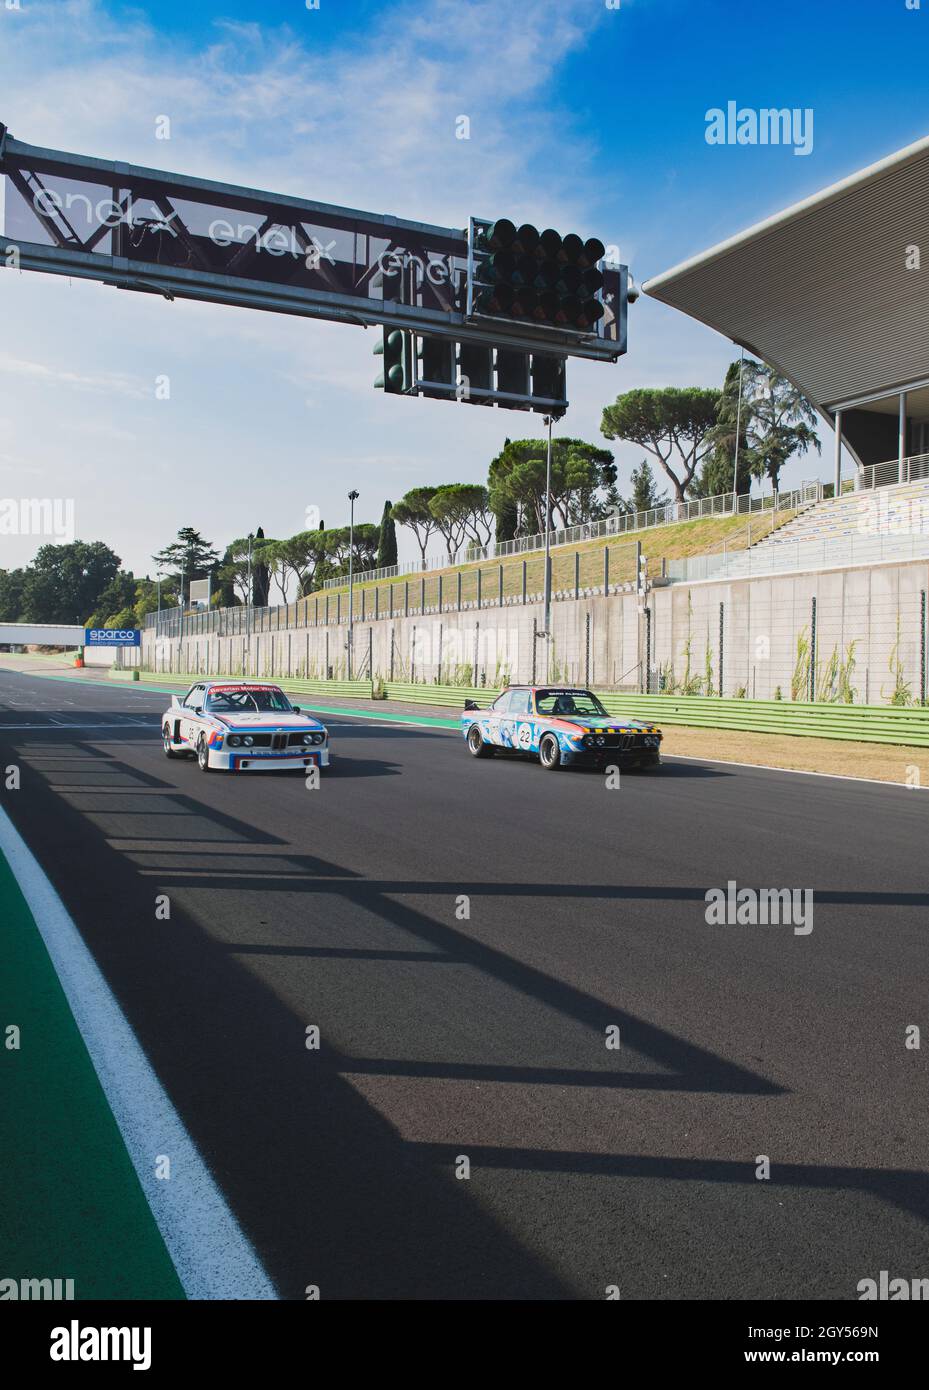 Italy, september 11 2021. Vallelunga classic. 70s vintage touring BMW cars racing in asphalt circuit straight racetrack Stock Photo